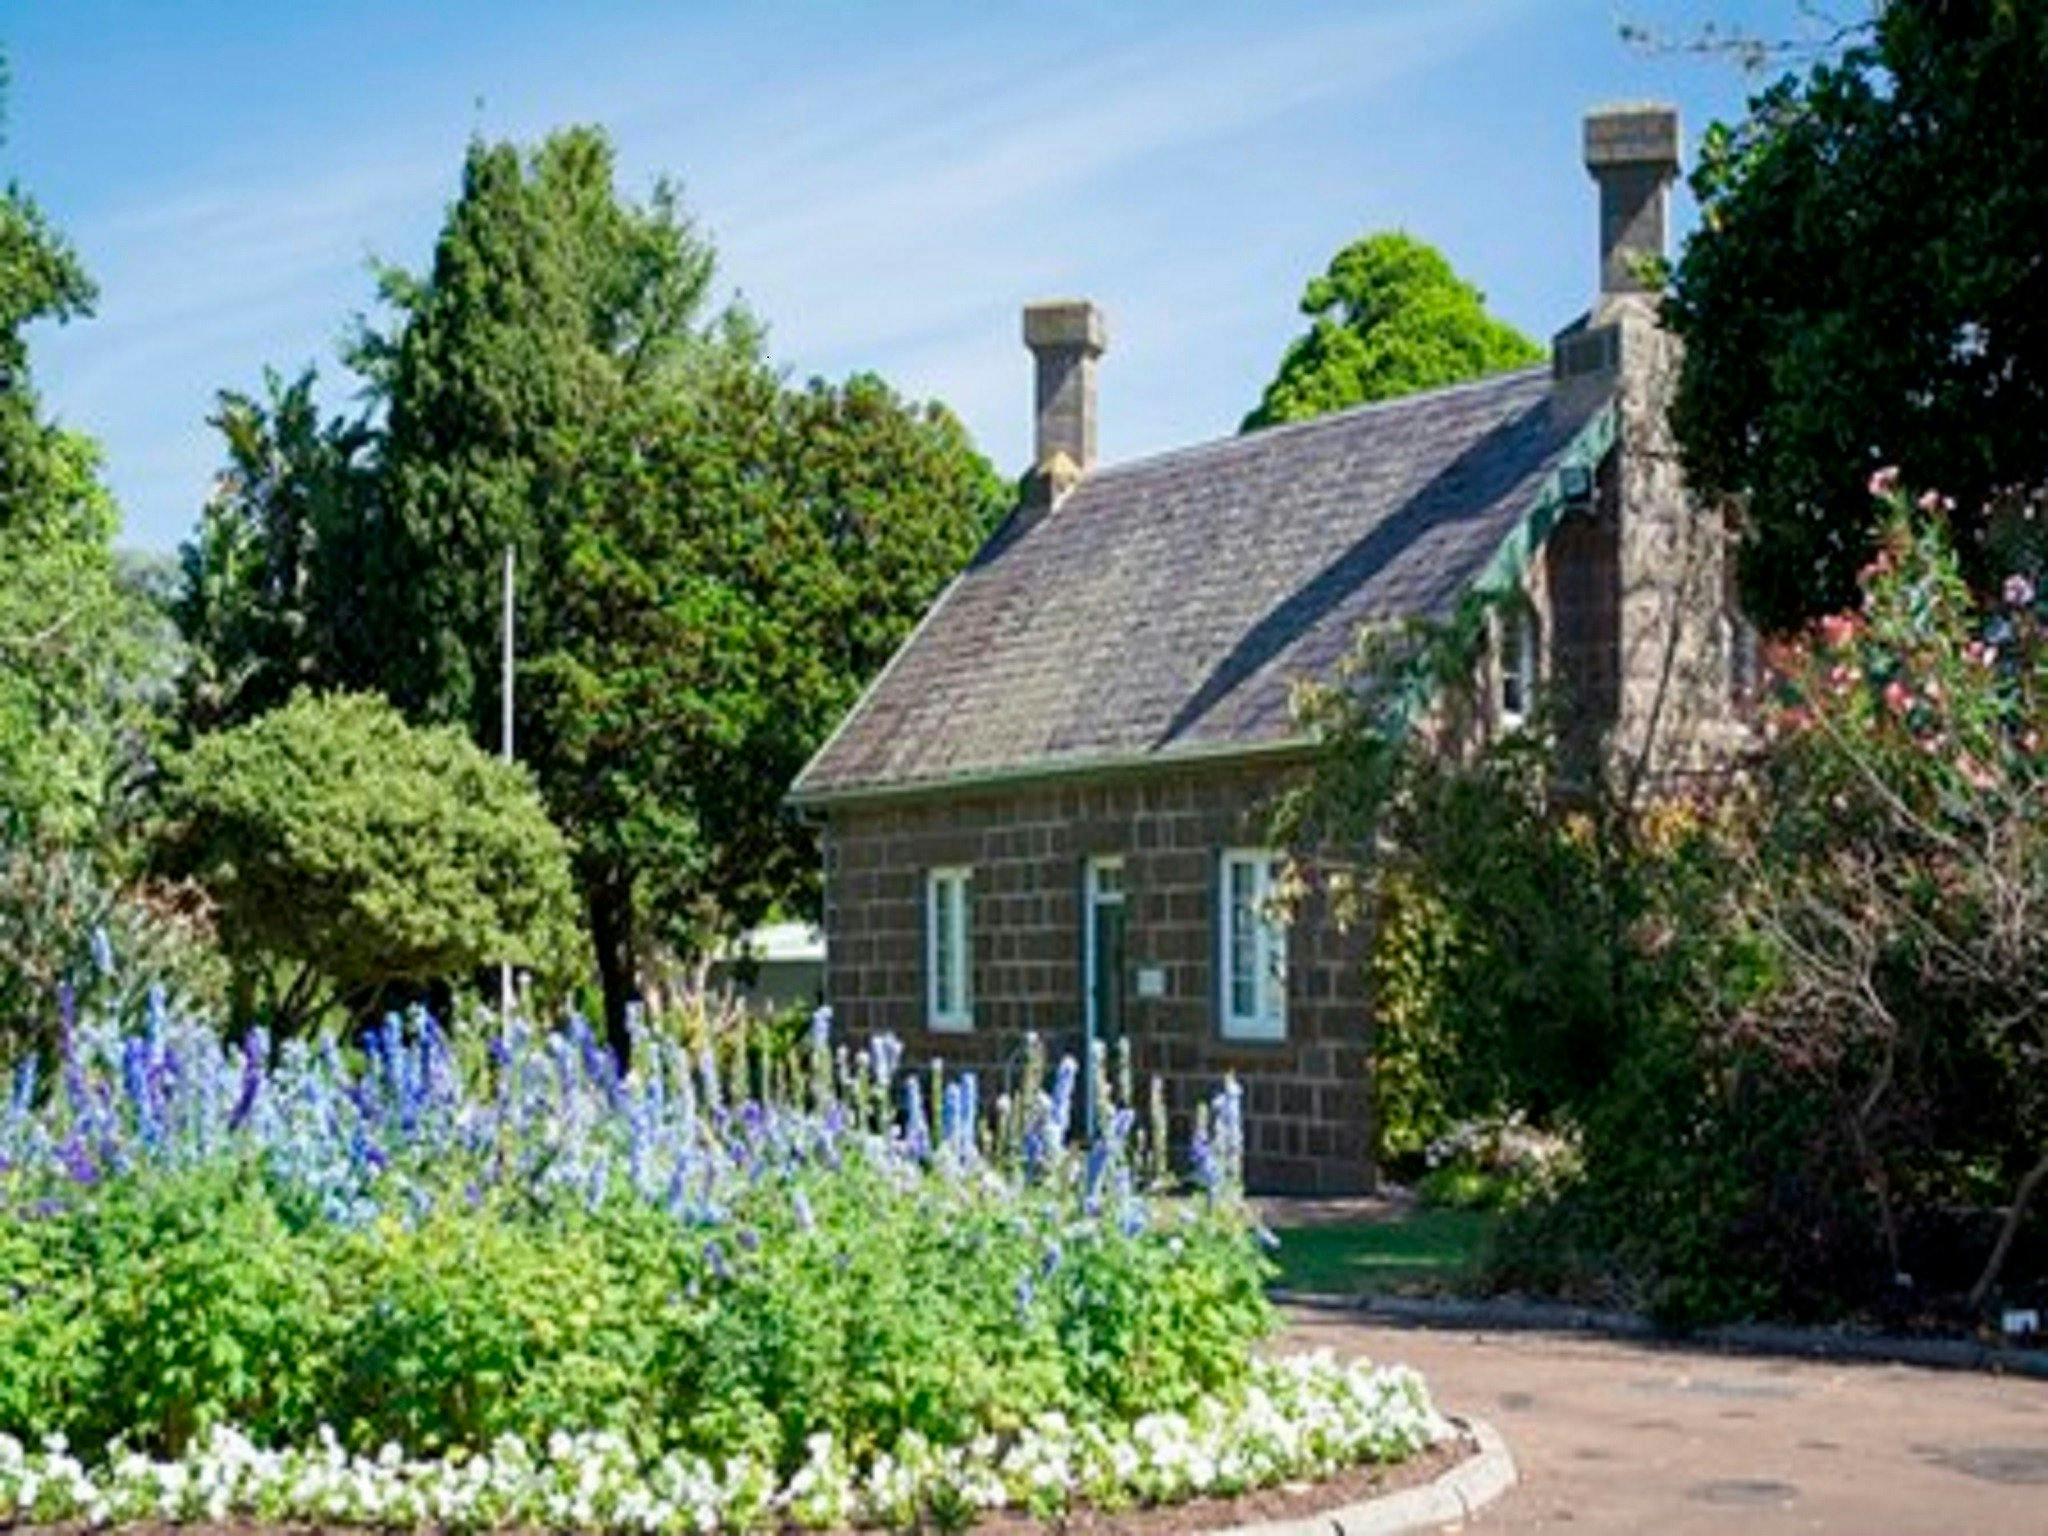 Cottage in the Gardens